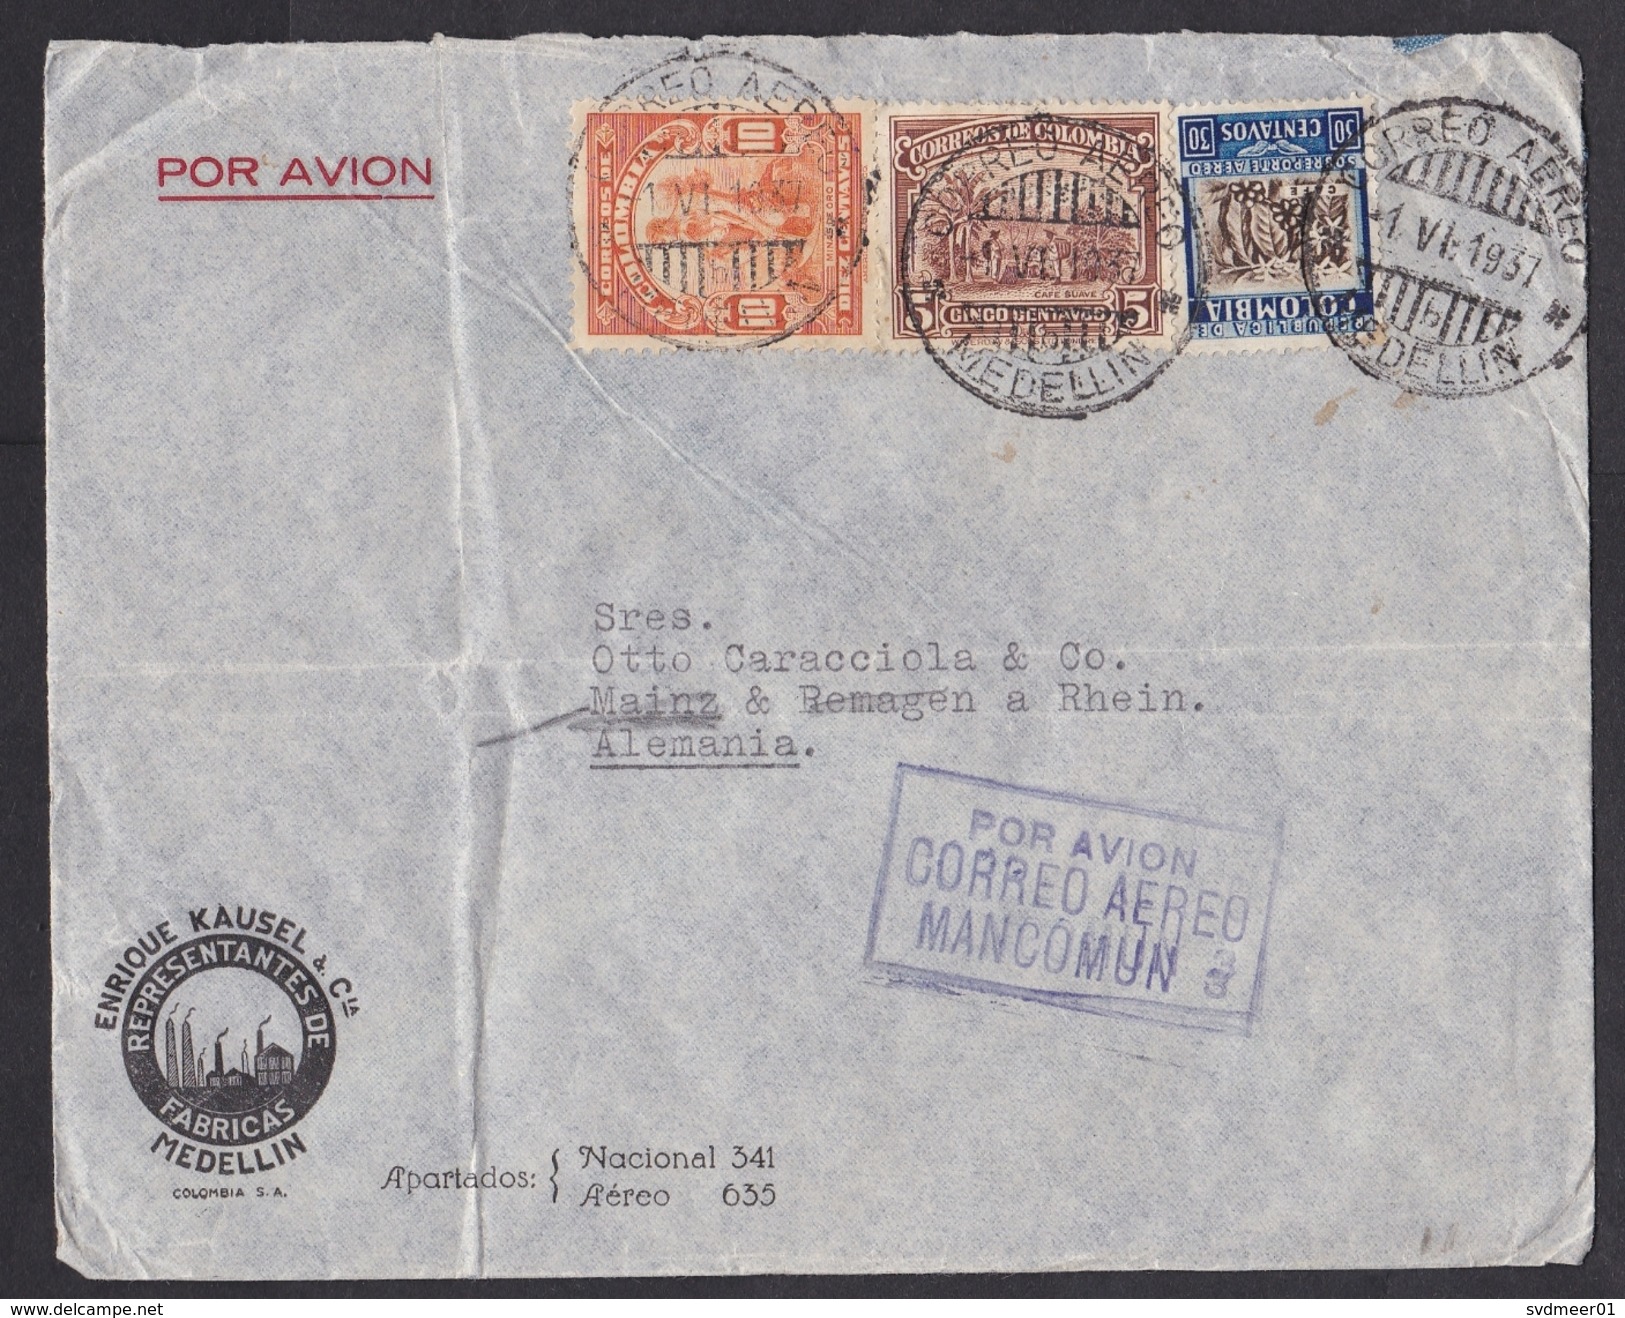 Colombia: Airmail Cover Medellin To Germany, 1937, 3 Stamps, Coffee, Mining, Mancomun (damaged, See Scan) - Colombia